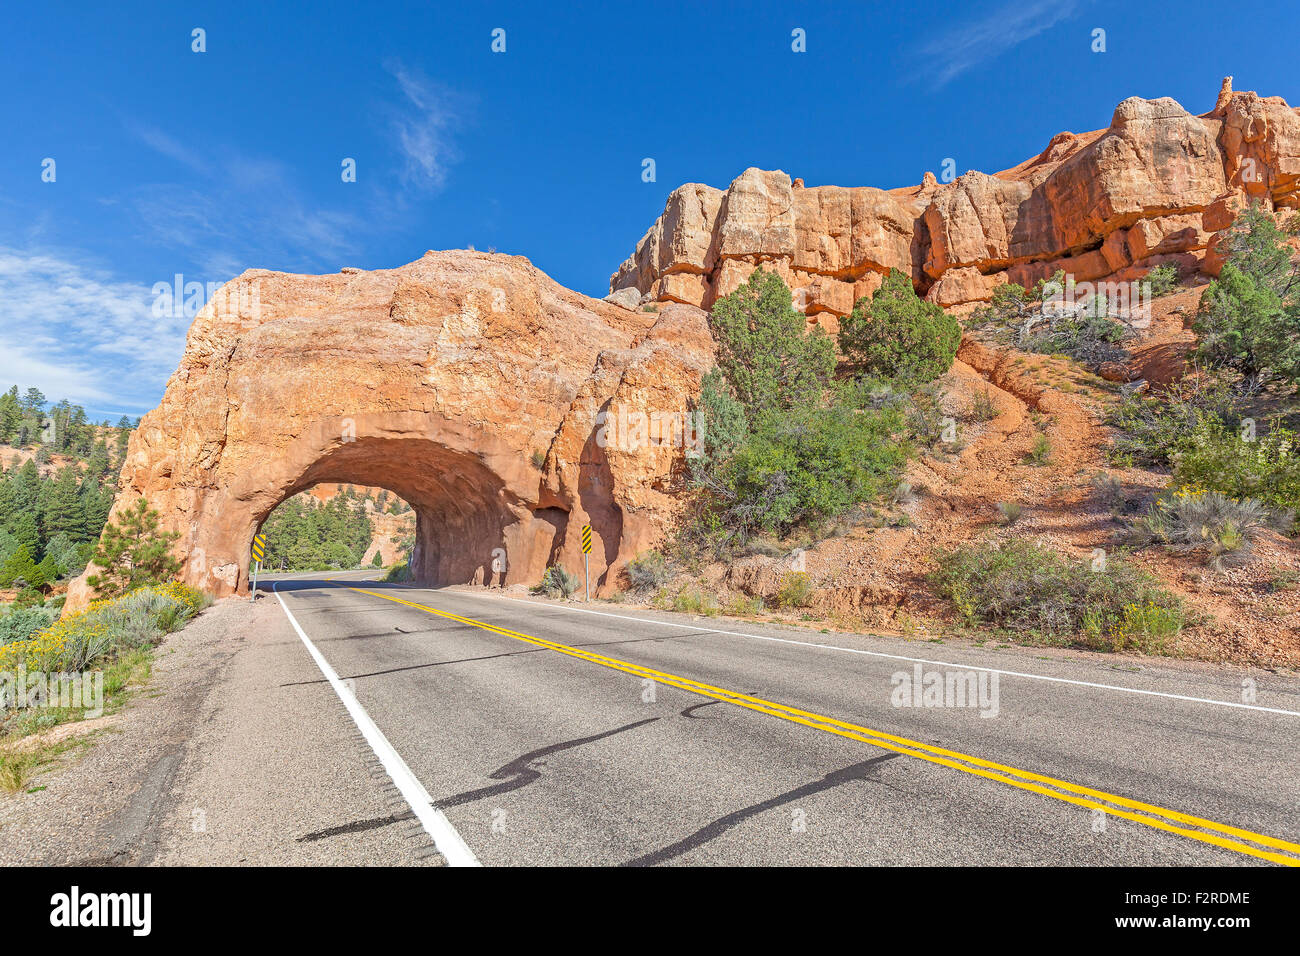 Natural arch road tunnel on the Scenic Byway 12, Utah, USA. Stock Photo